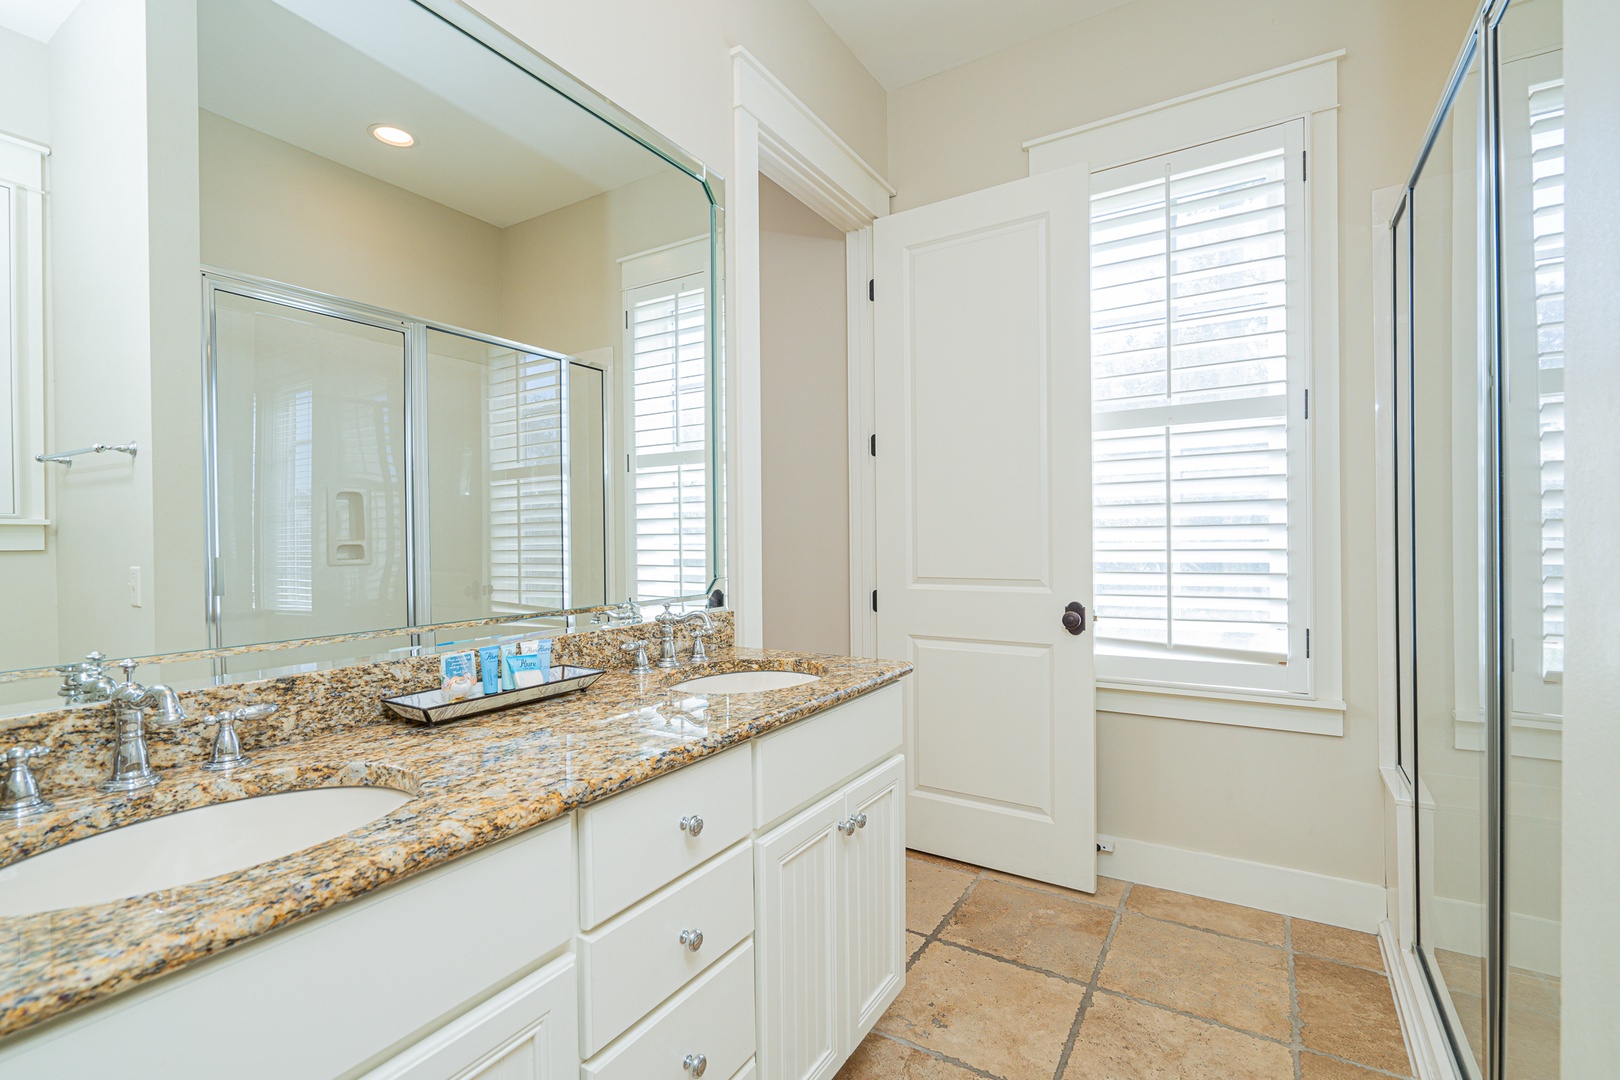 The king ensuite showcases a double vanity & glass shower